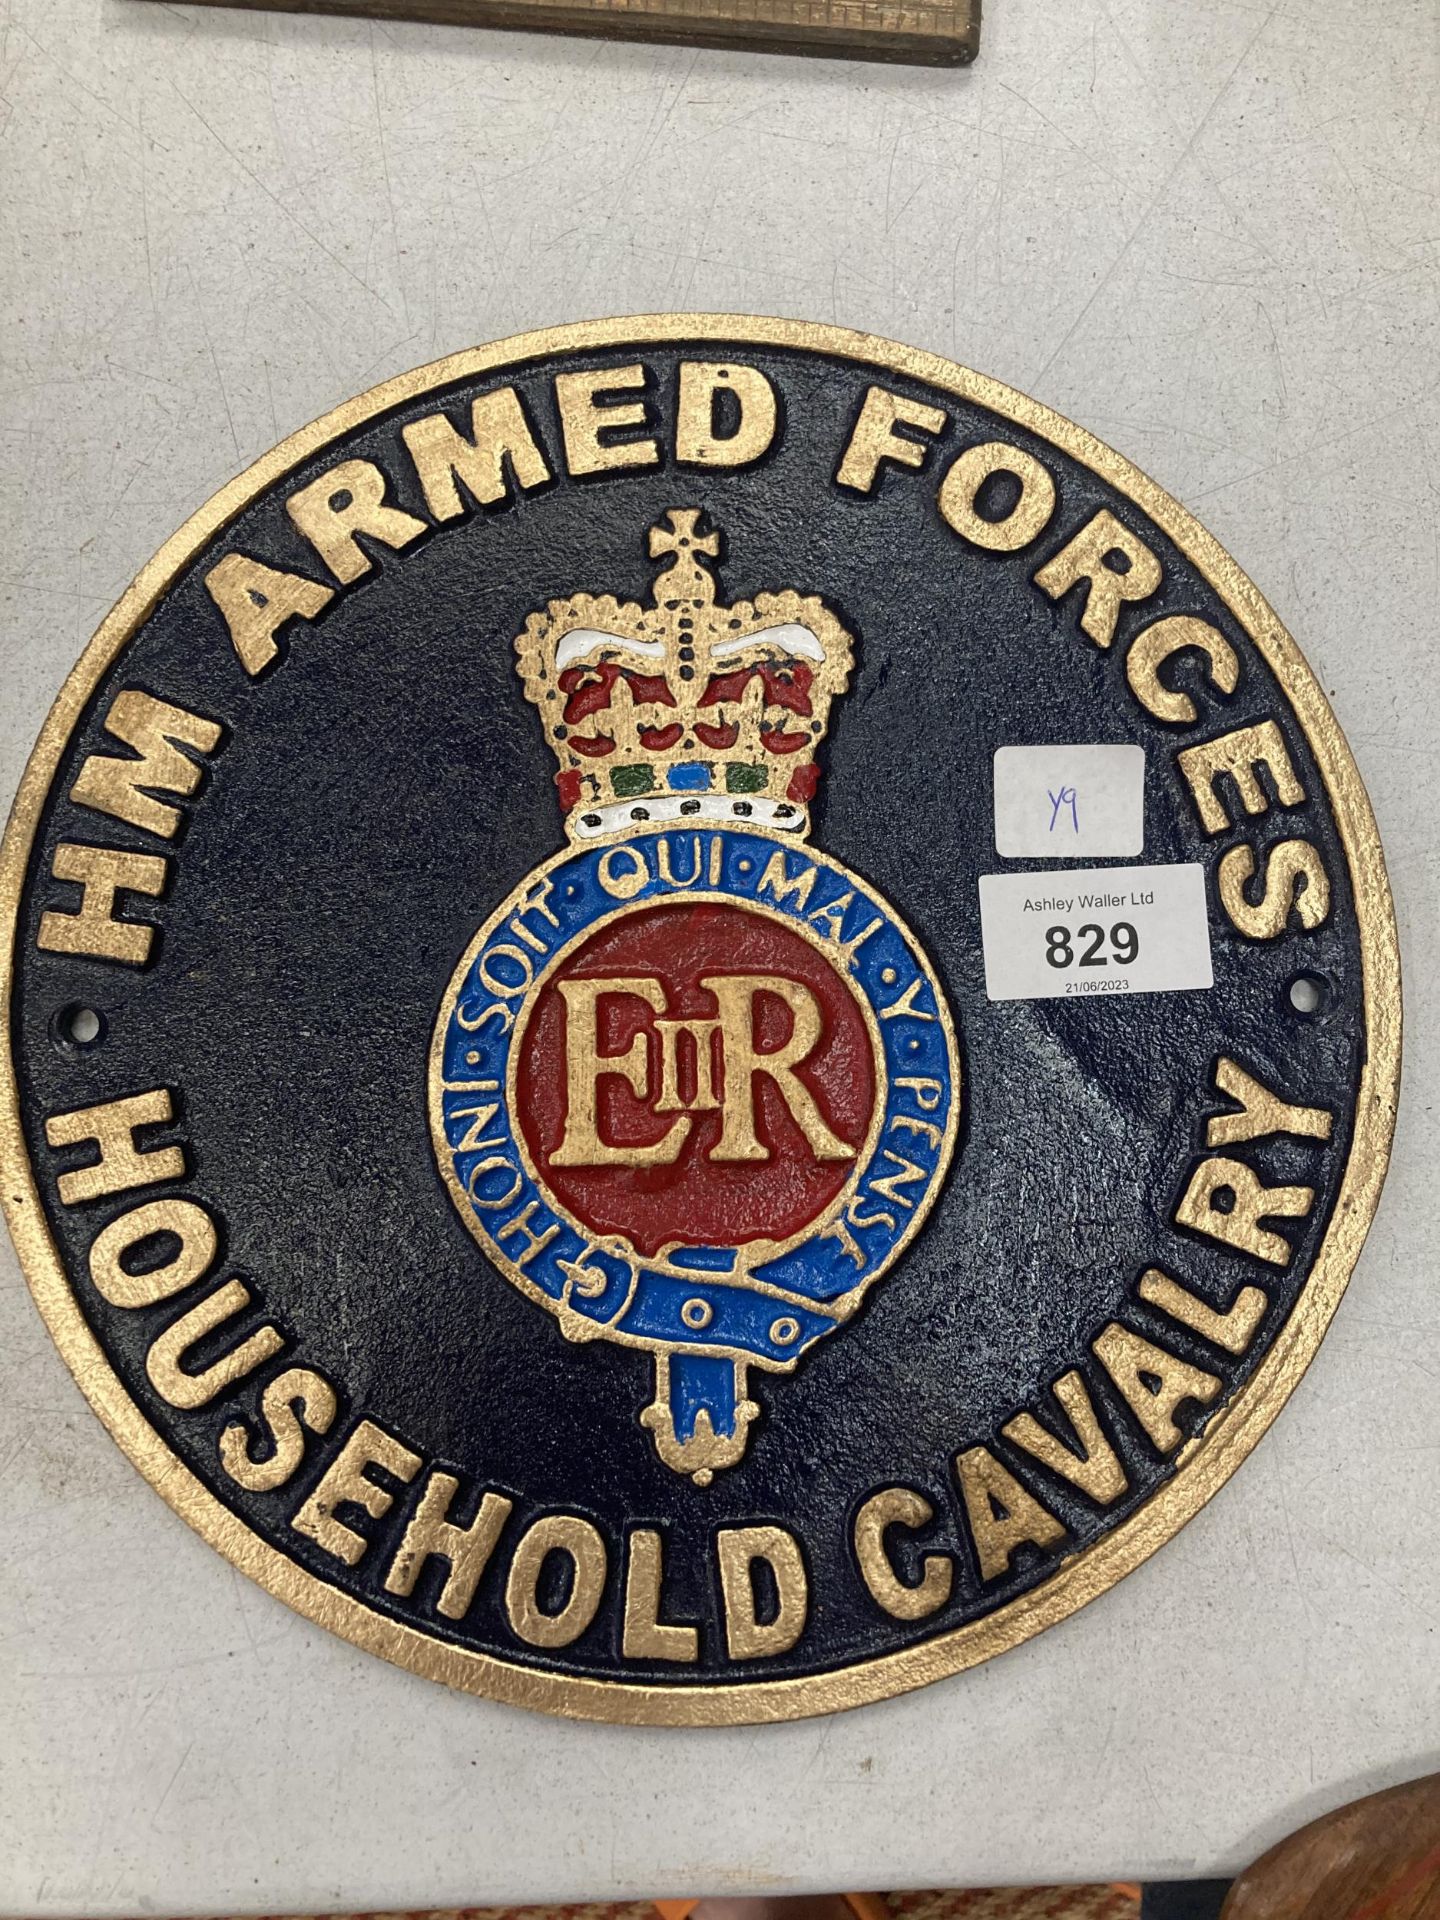 A CAST ARMED FORCES SIGN